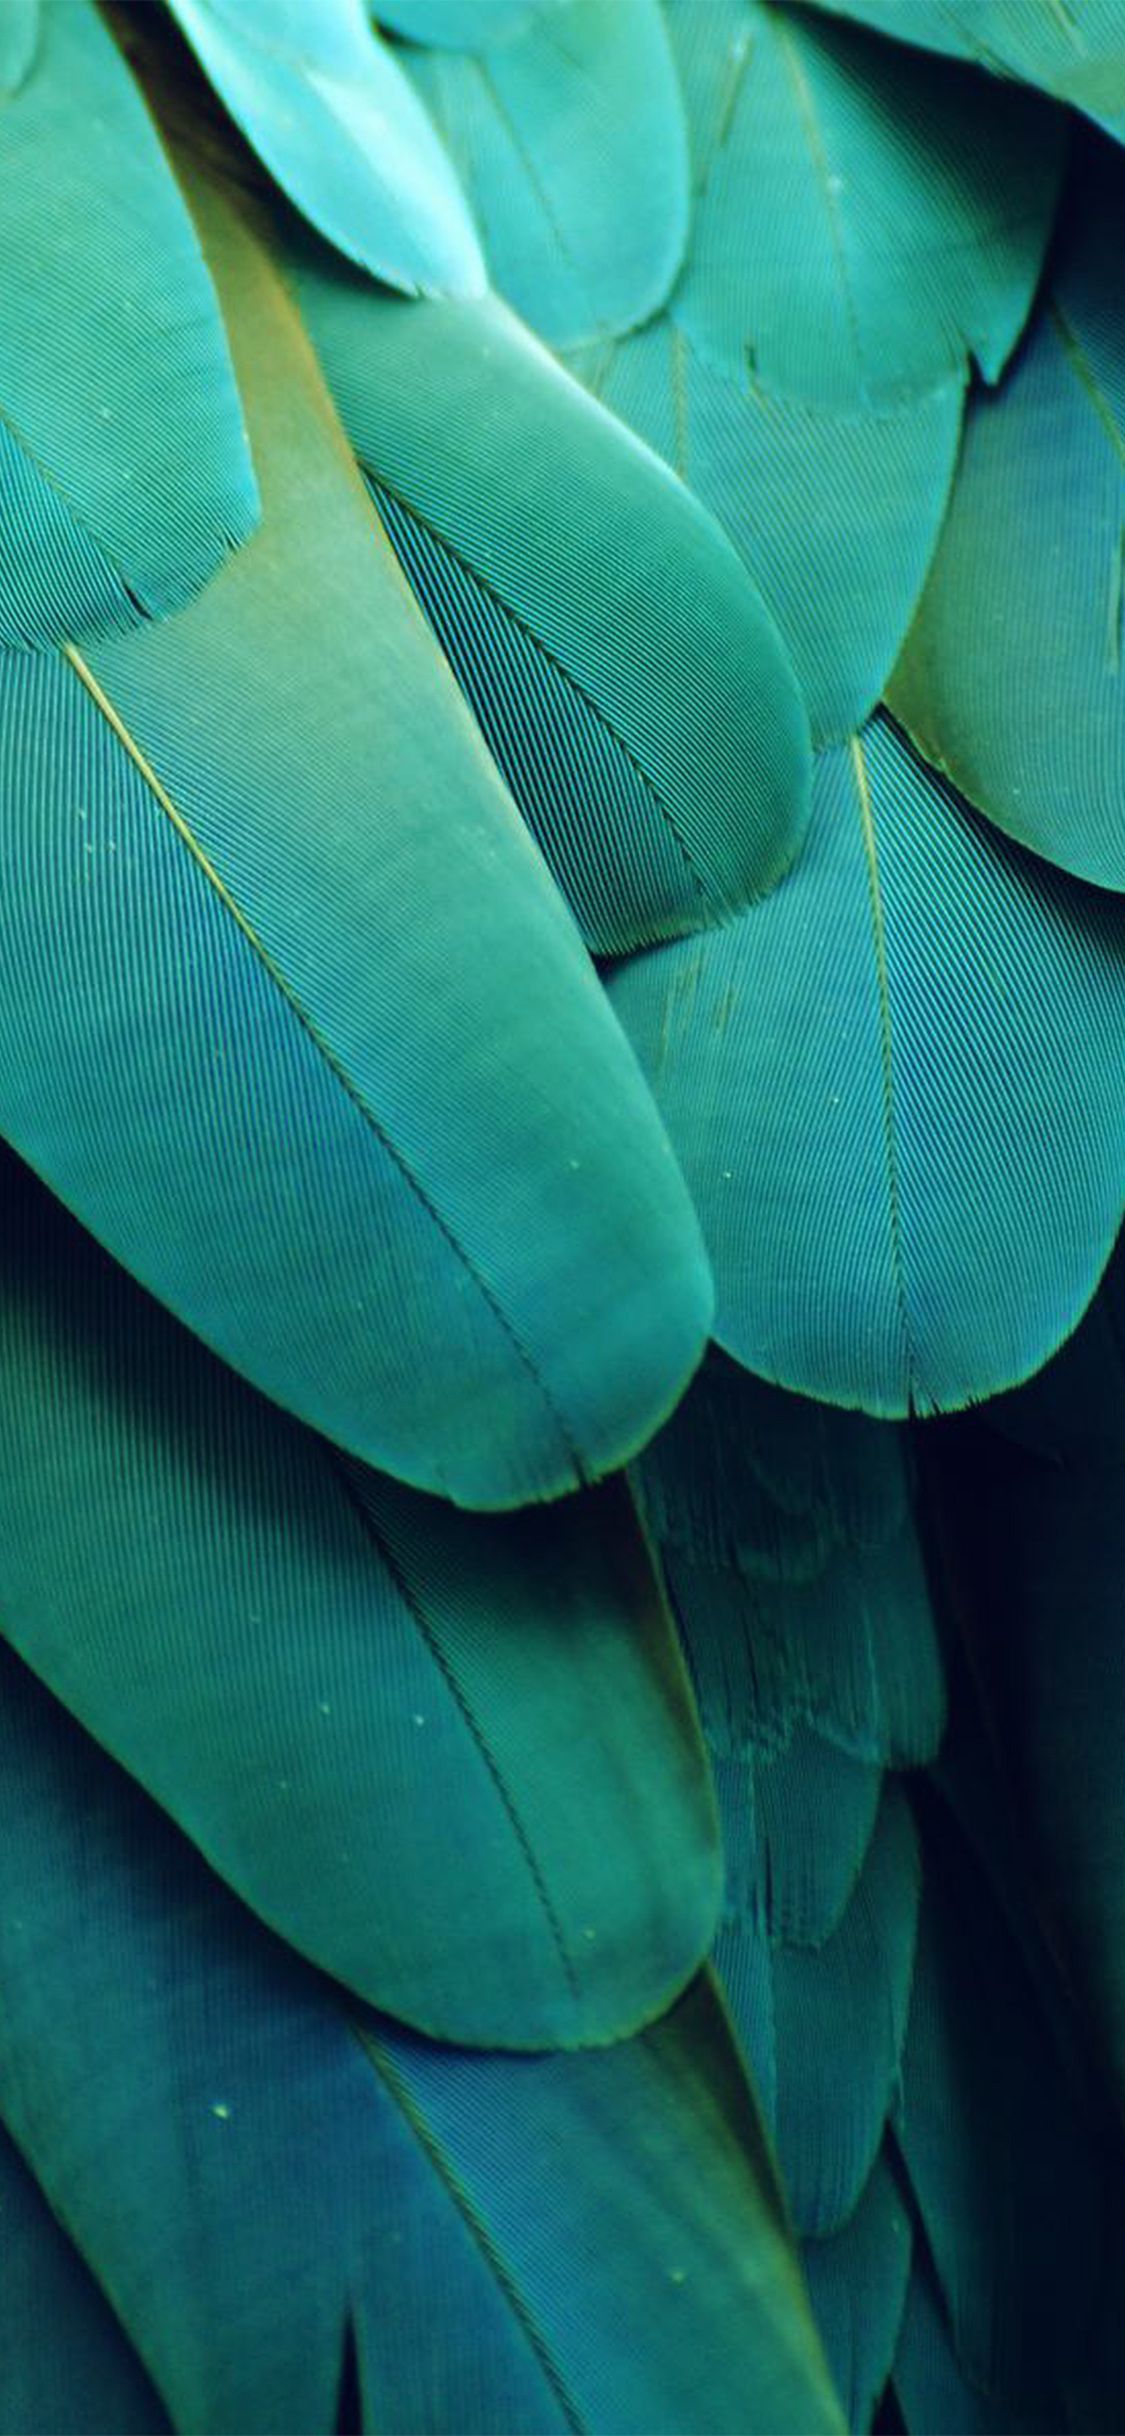 A close up of a parrot's feathers. - Teal